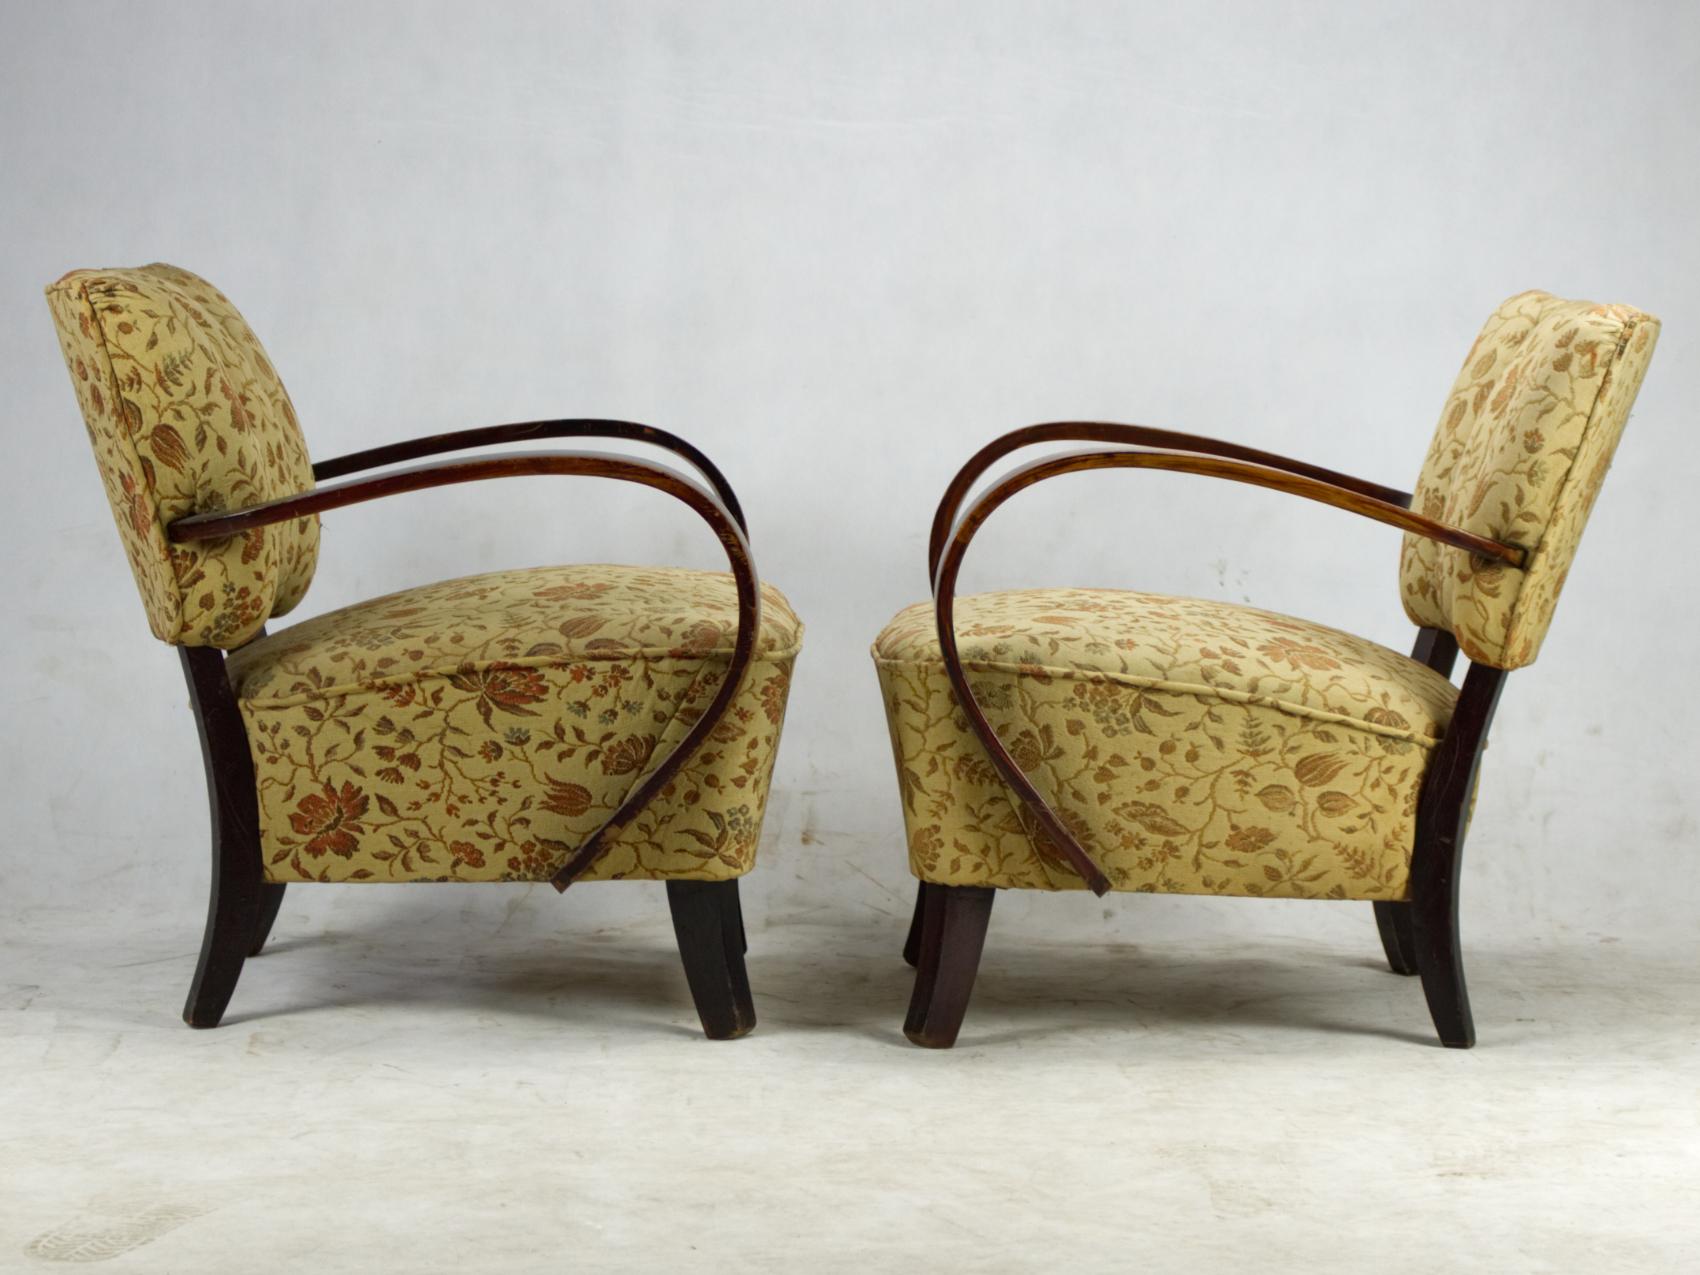 These armchairs, model H 237 were designed by Jindrich Halabala and produced in Czechoslovakia in the 1930s by UP Zavody Brno.
The chairs are in vintage condition and the springs and wood are very stable.